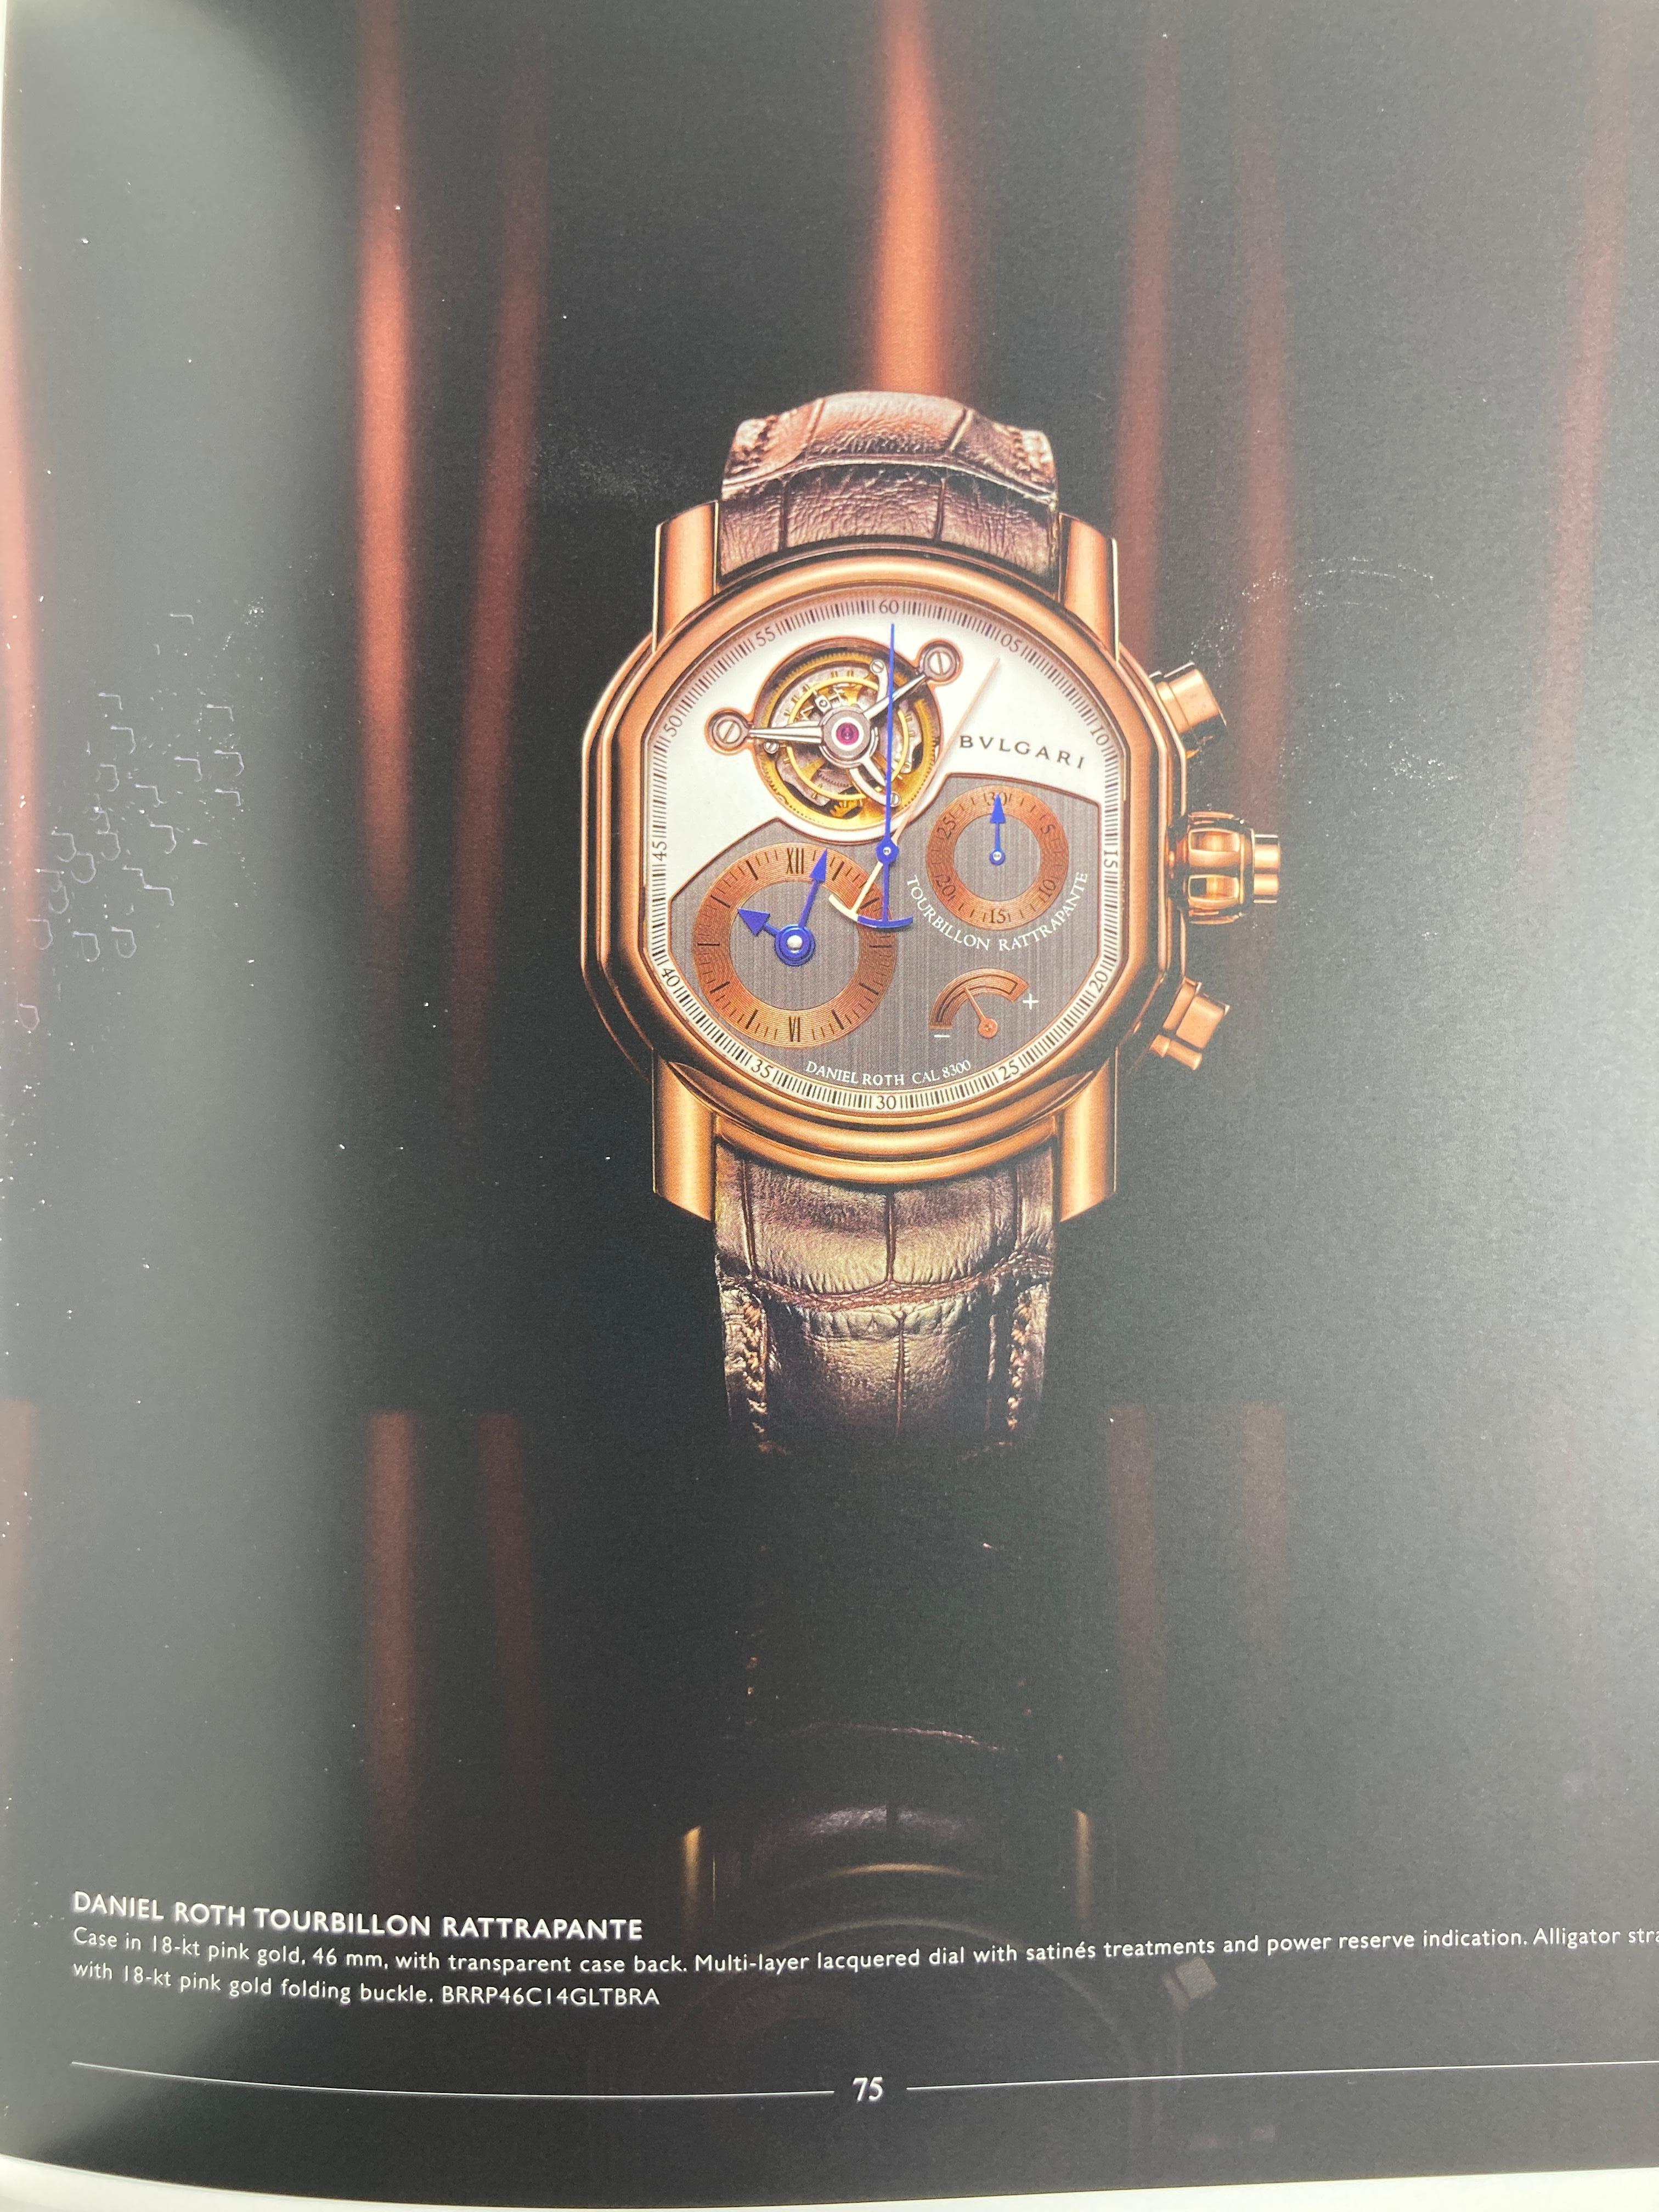 Set of Two Bvlgari Brand Book Catalogue Jewellery and Watches 2013 For Sale 4